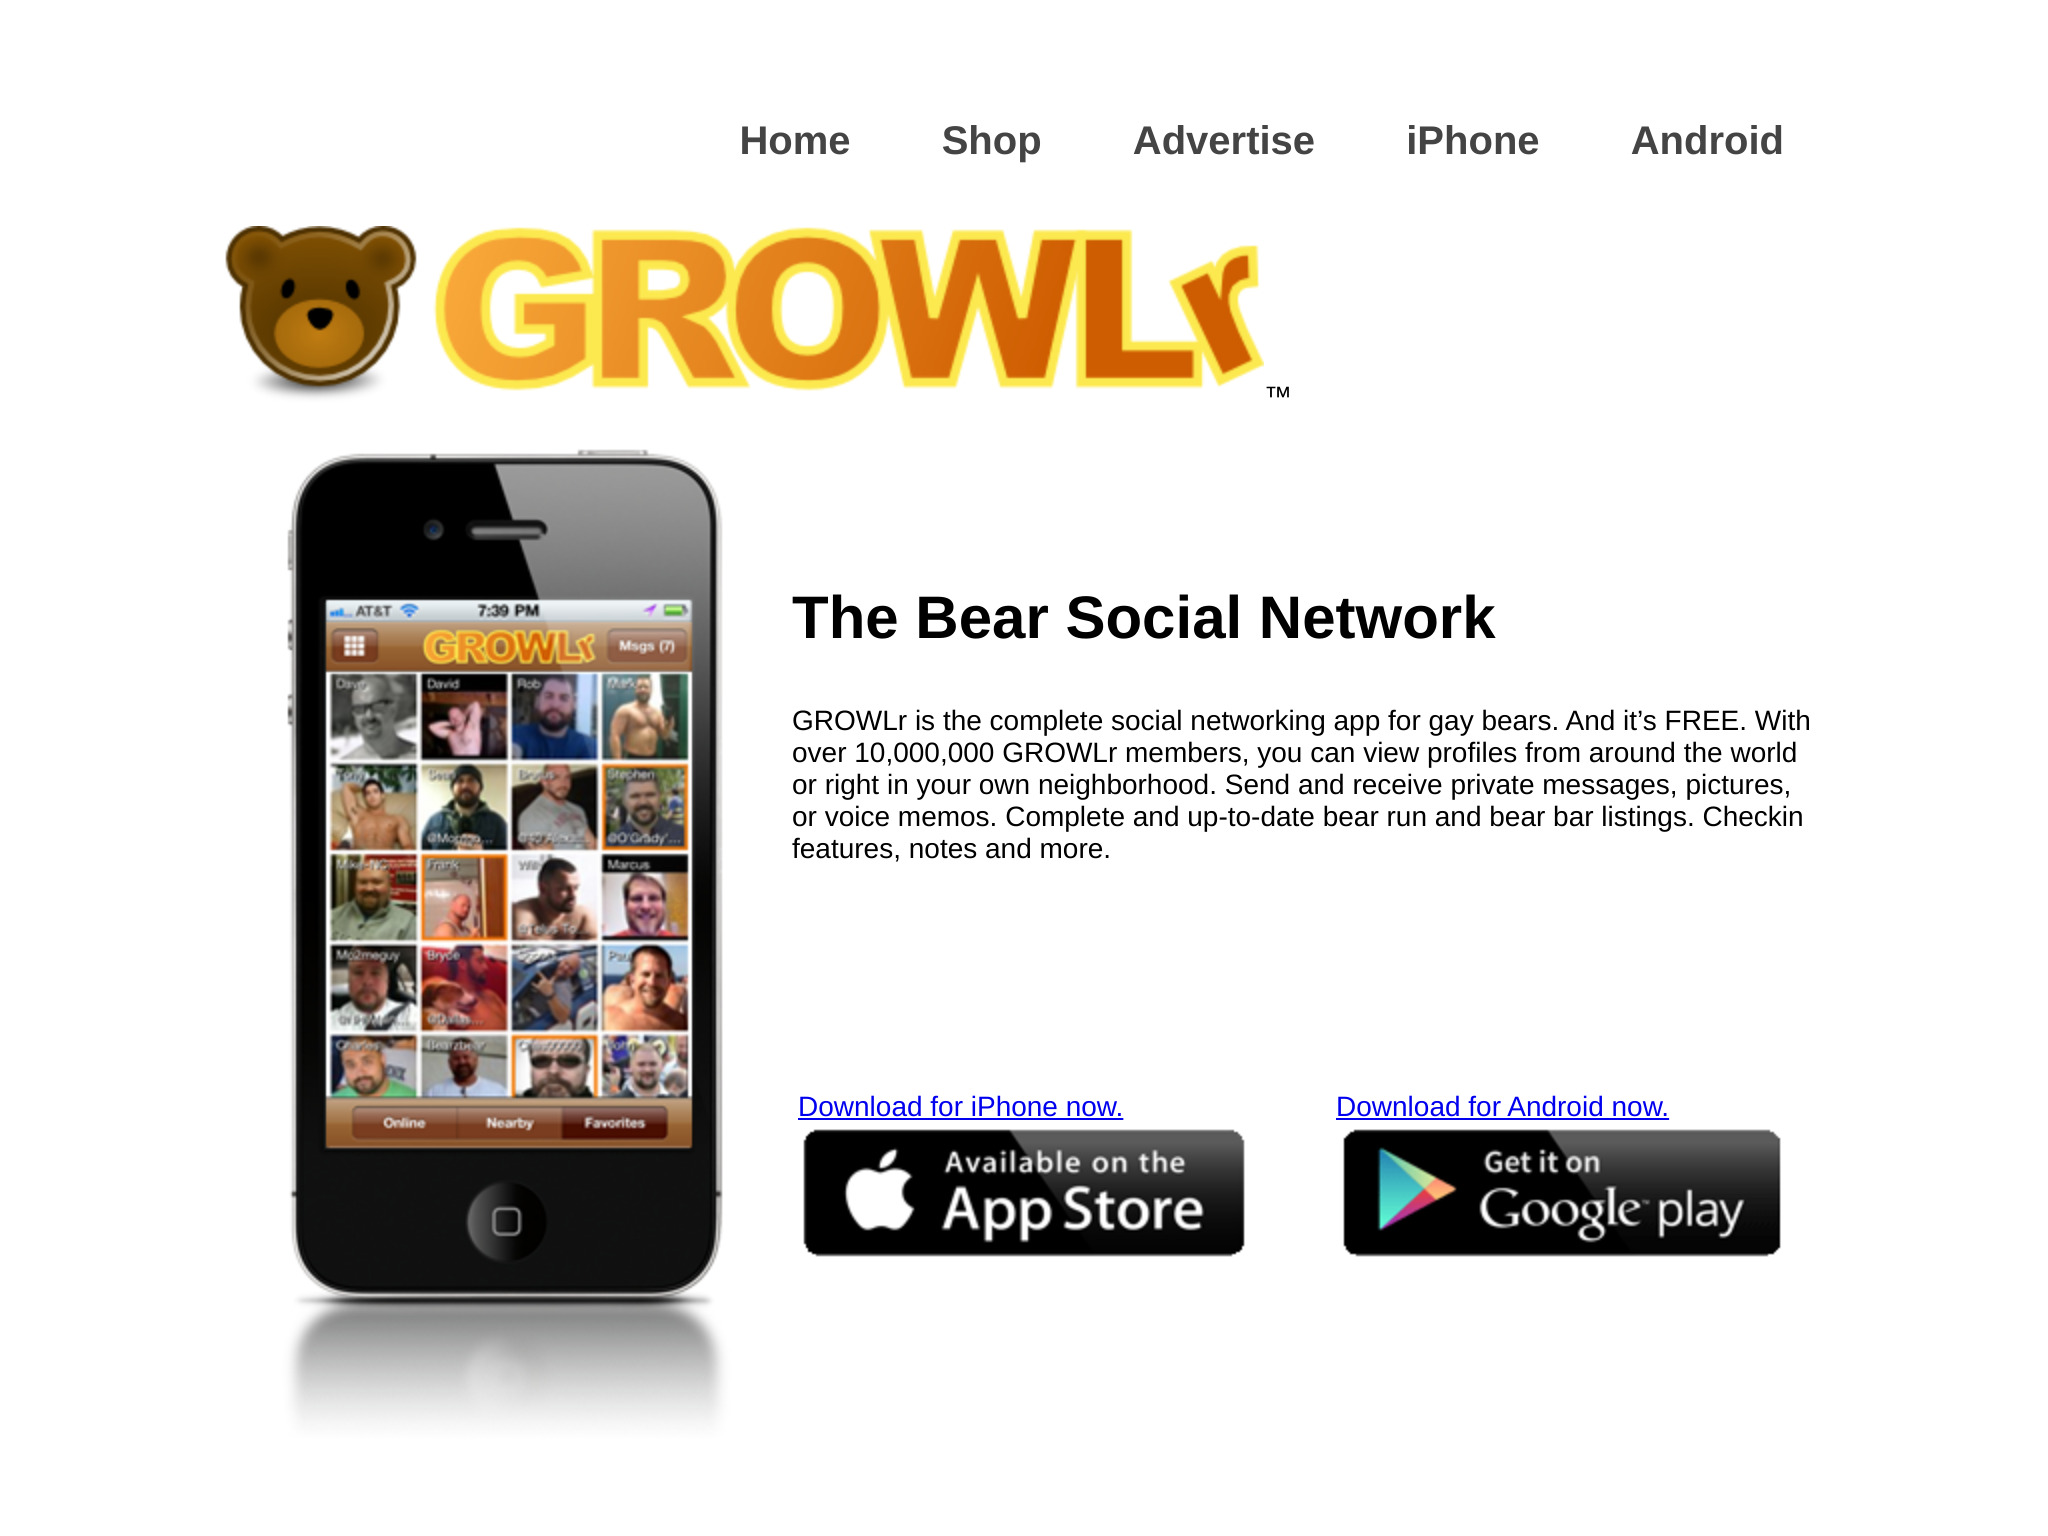 Growlr Review – Does it Deliver On Its Promise?